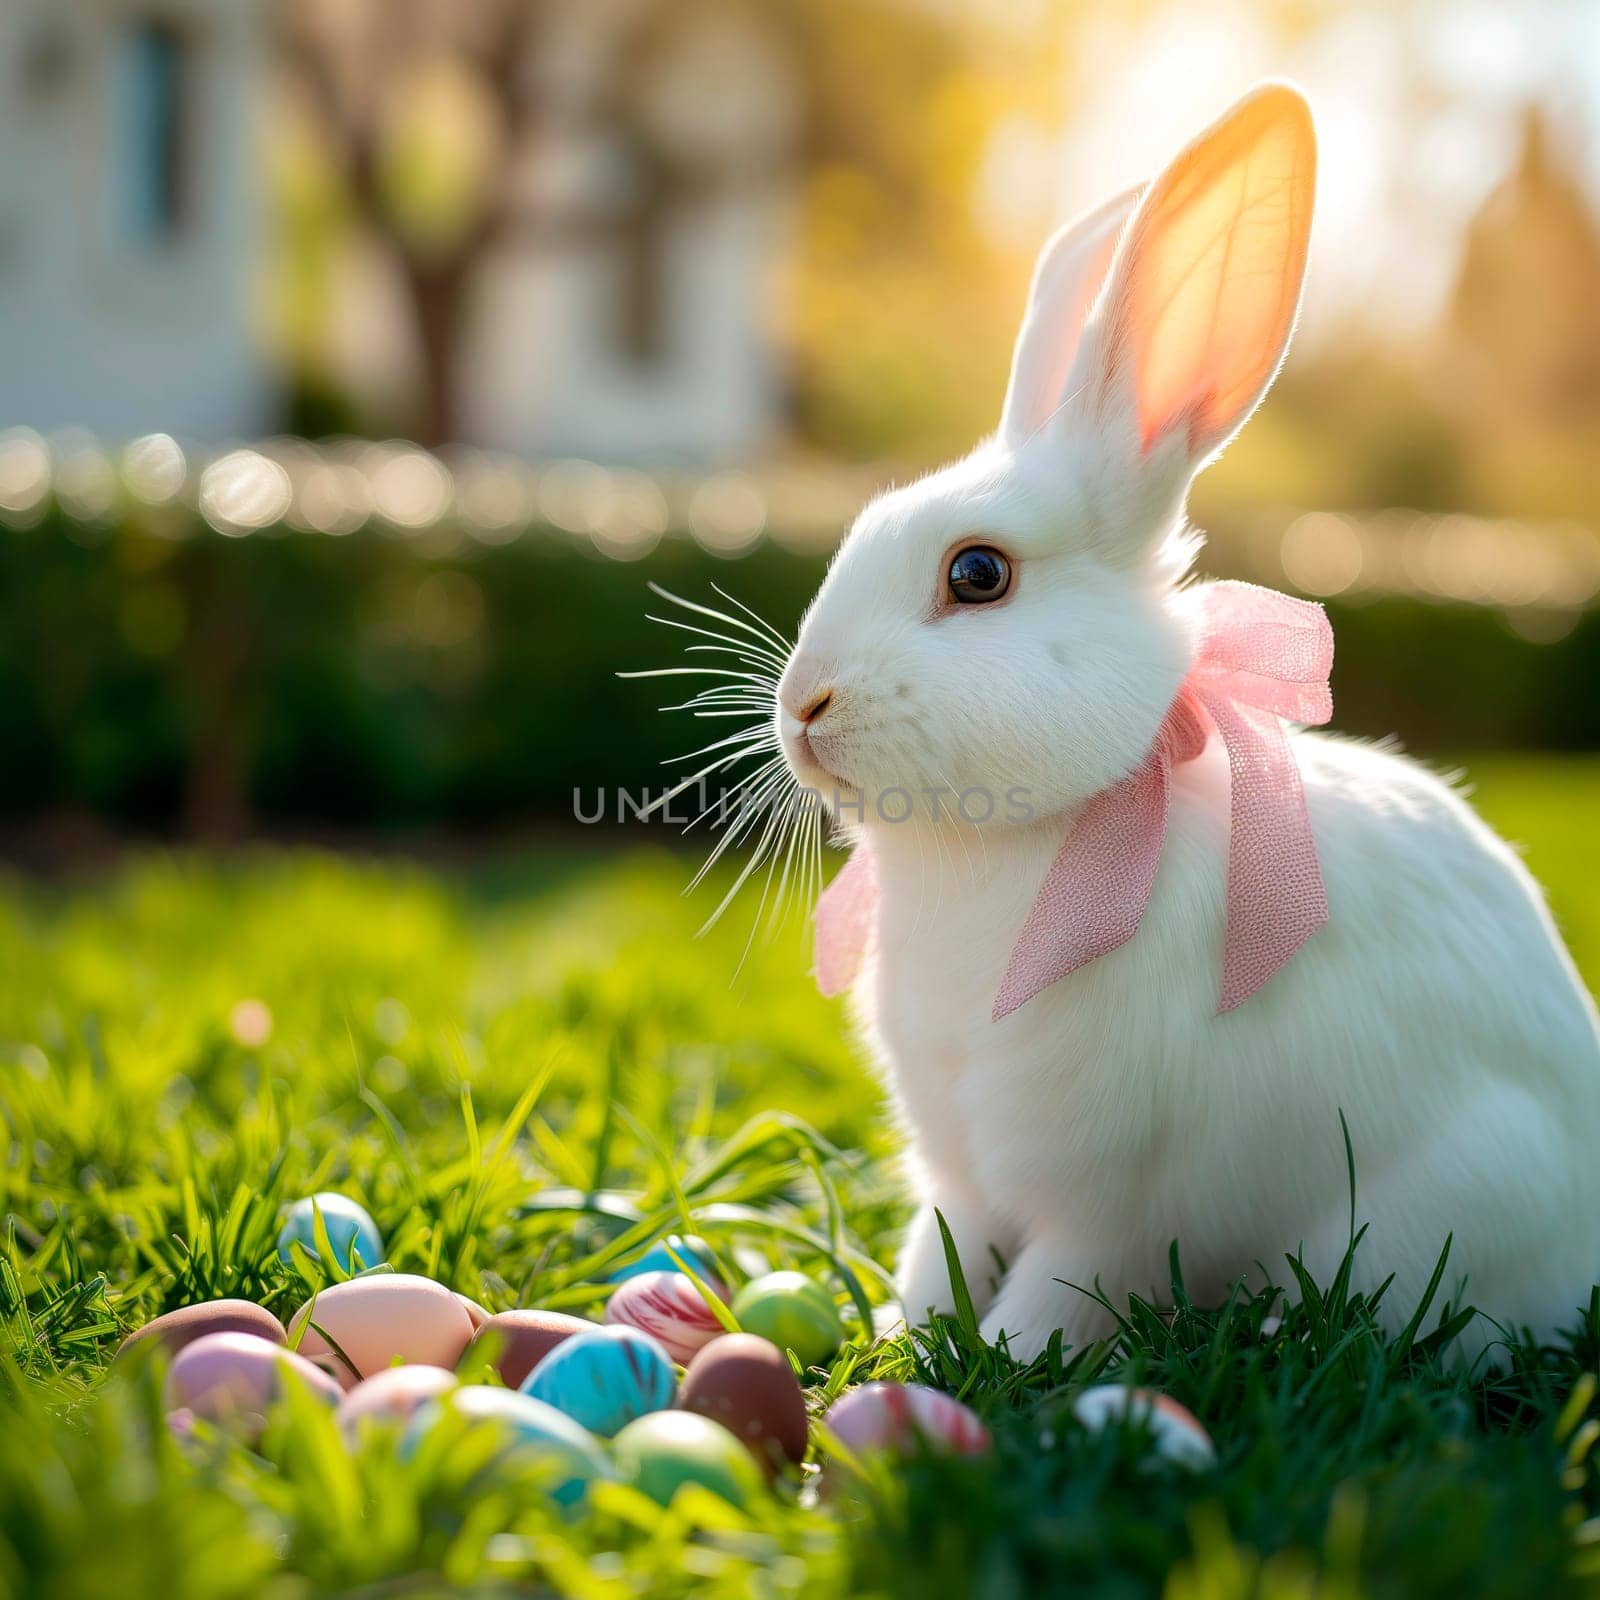 One beautiful white Easter bunny with a pink bow around his neck sits on the right on a green lawn with Easter eggs scattered around in the backyard of a house, close-up side view.